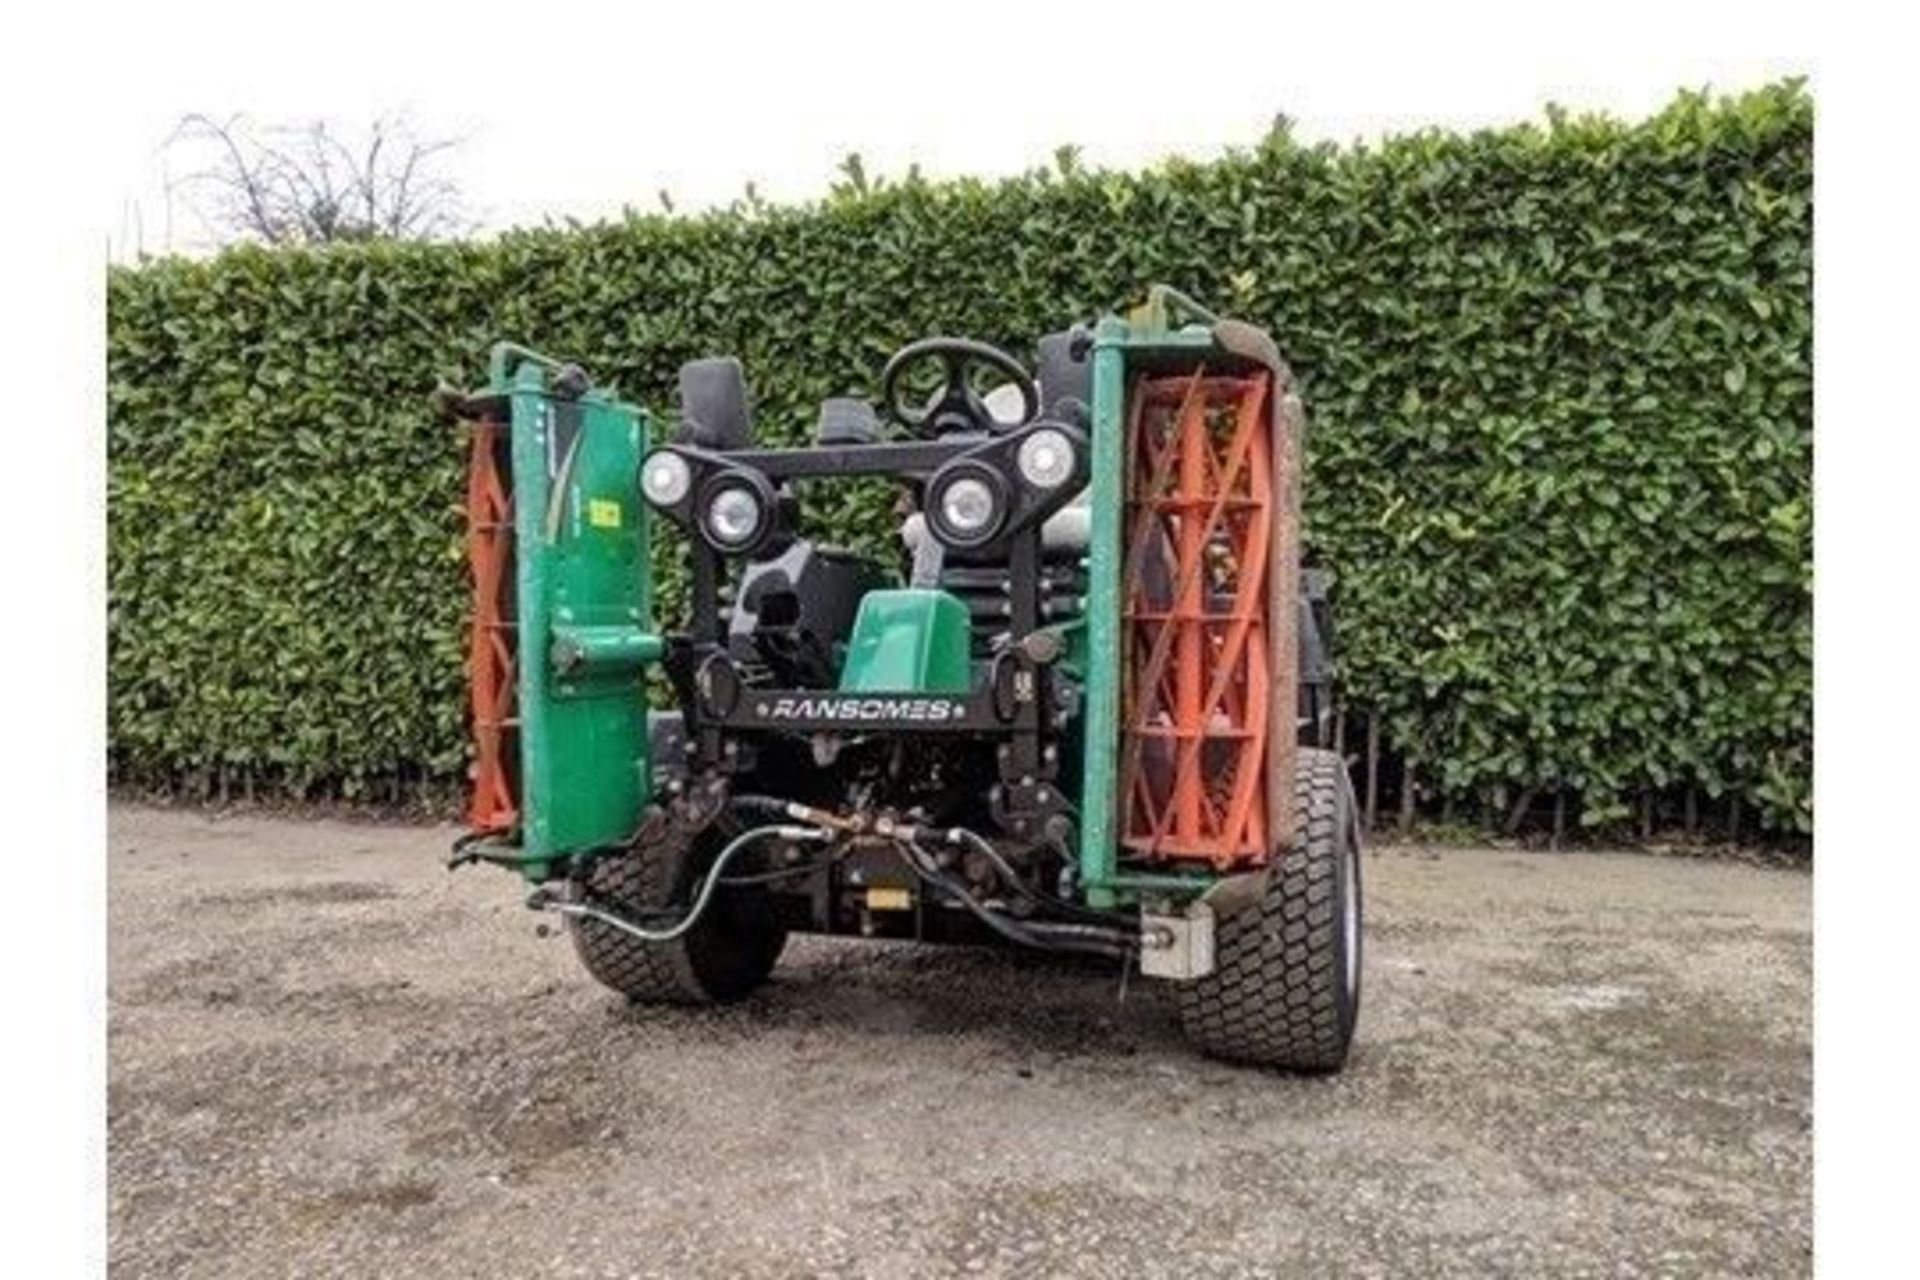 2012 Ransomes Parkway 3 4WD Triple Cylinder Mower - Image 6 of 8